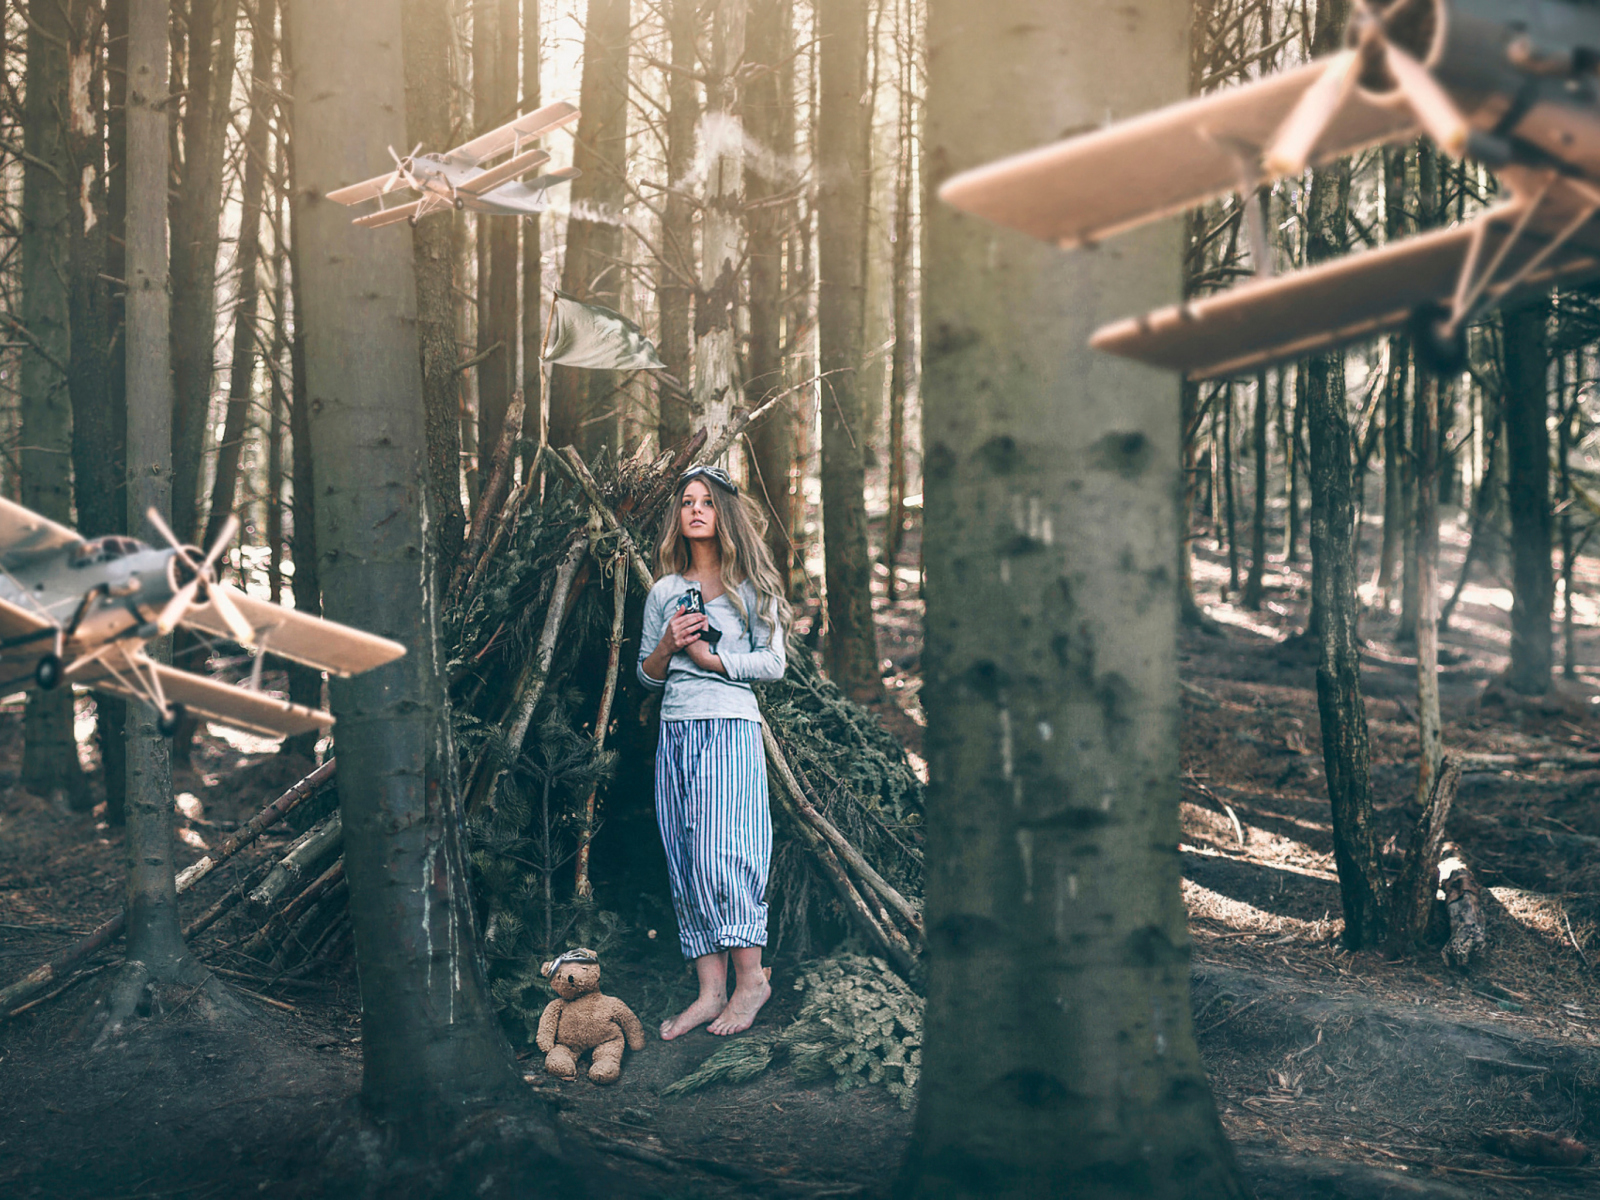 Das Girl And Teddy Bear In Forest By Rosie Hardy Wallpaper 1600x1200